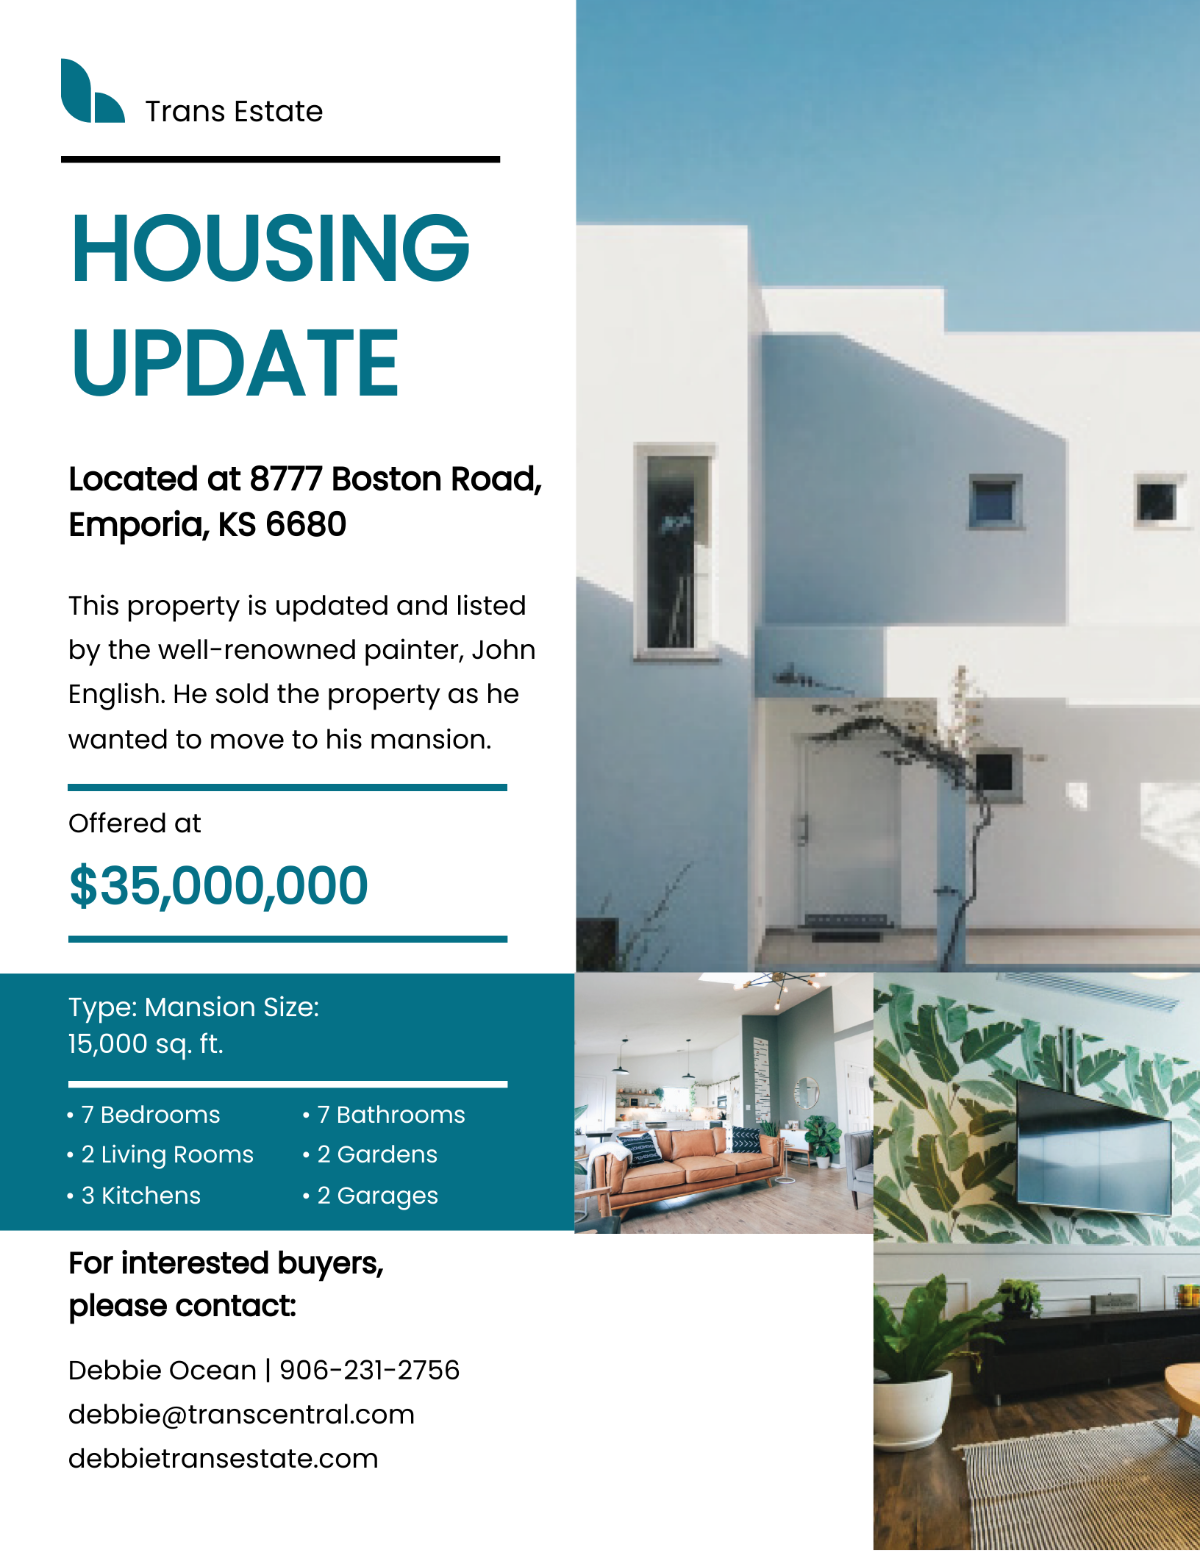 Real Estate Housing Update Flyer Template